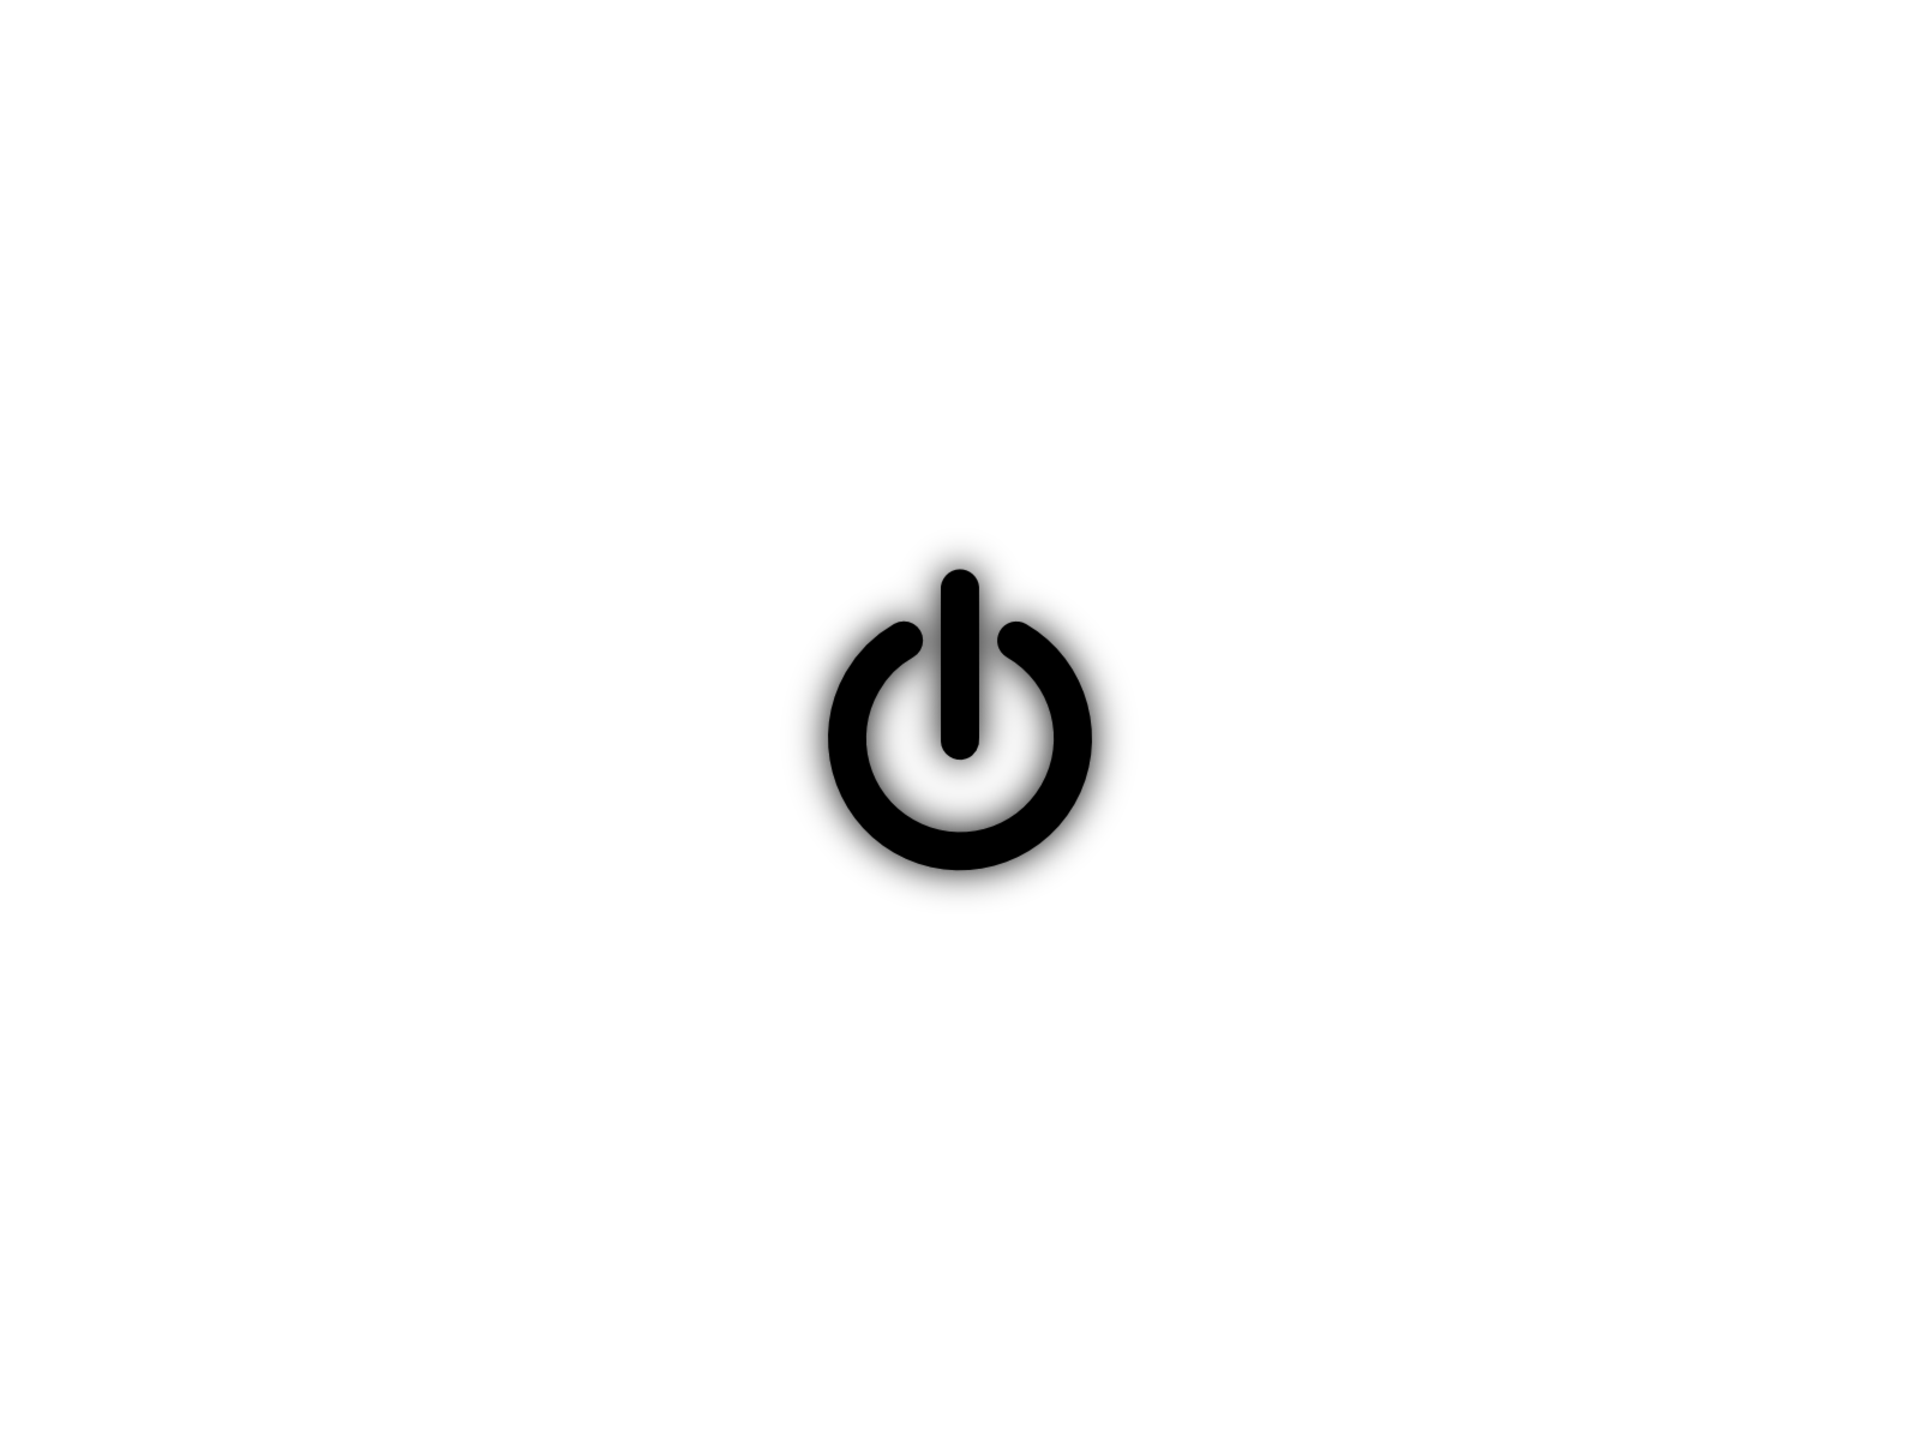 Power Button Wallpaper Image Photo Picture Background